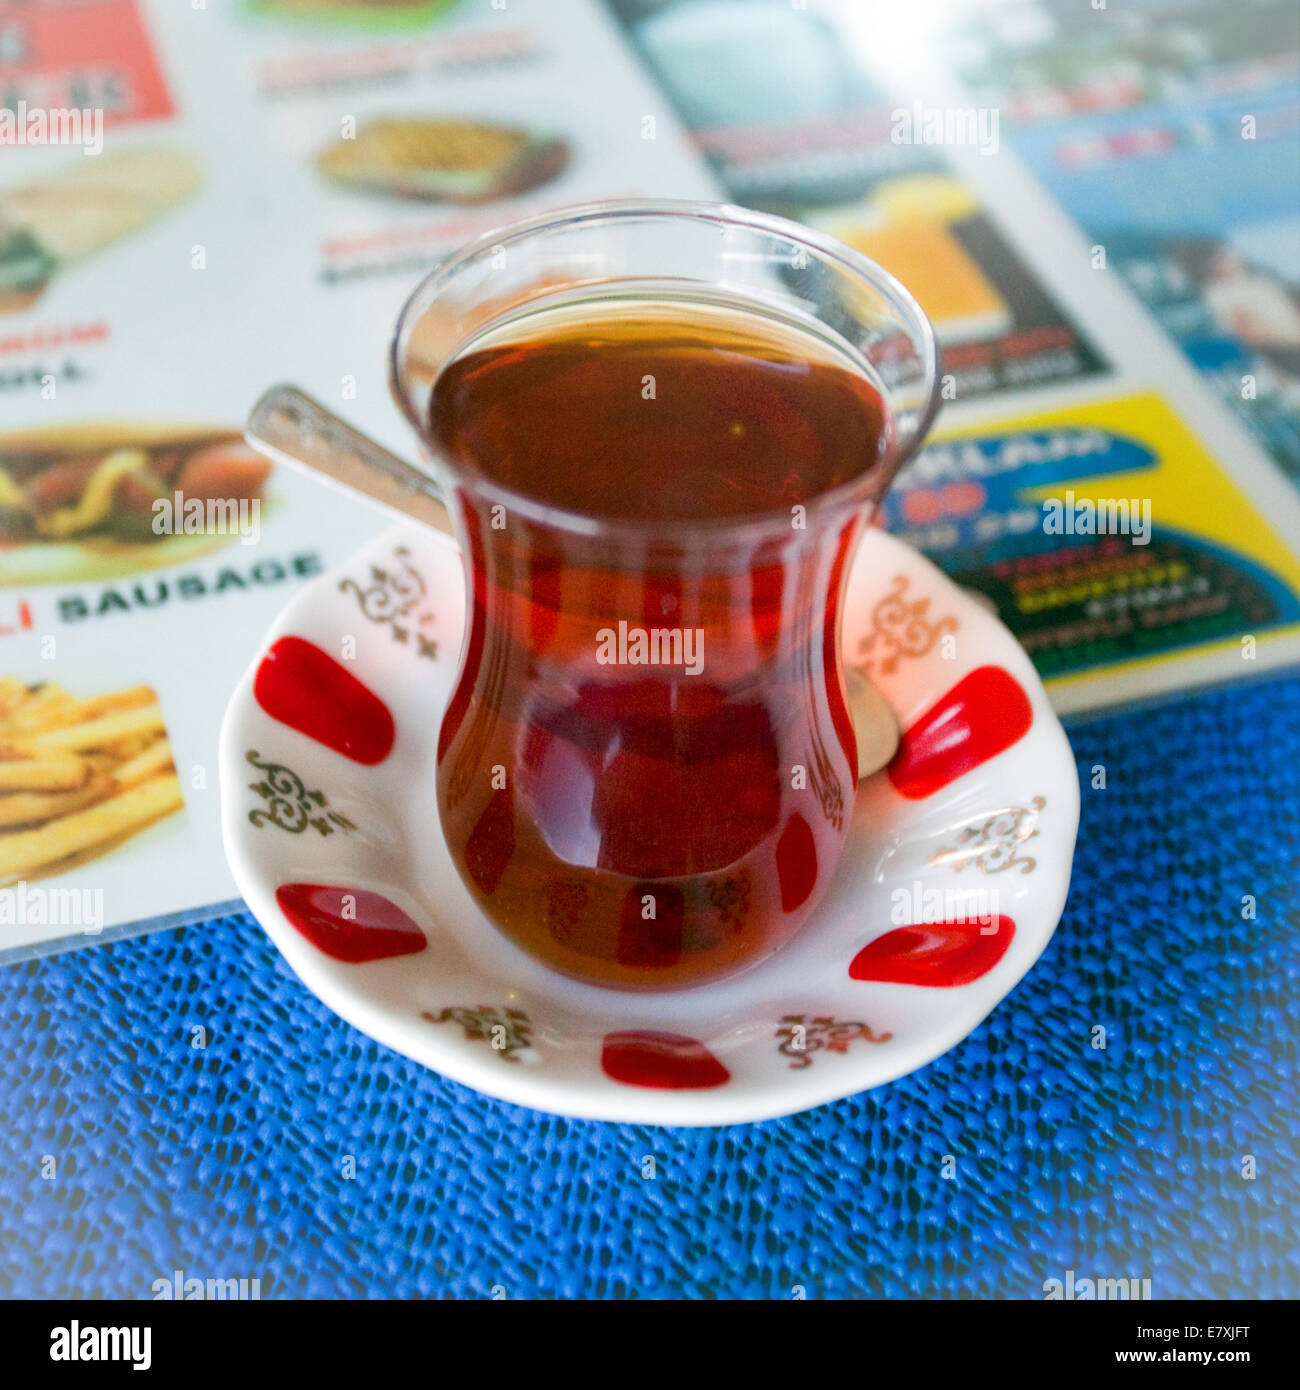 A turkish tea in cup with saucer sitting on a menu and blue table cloth Stock Photo